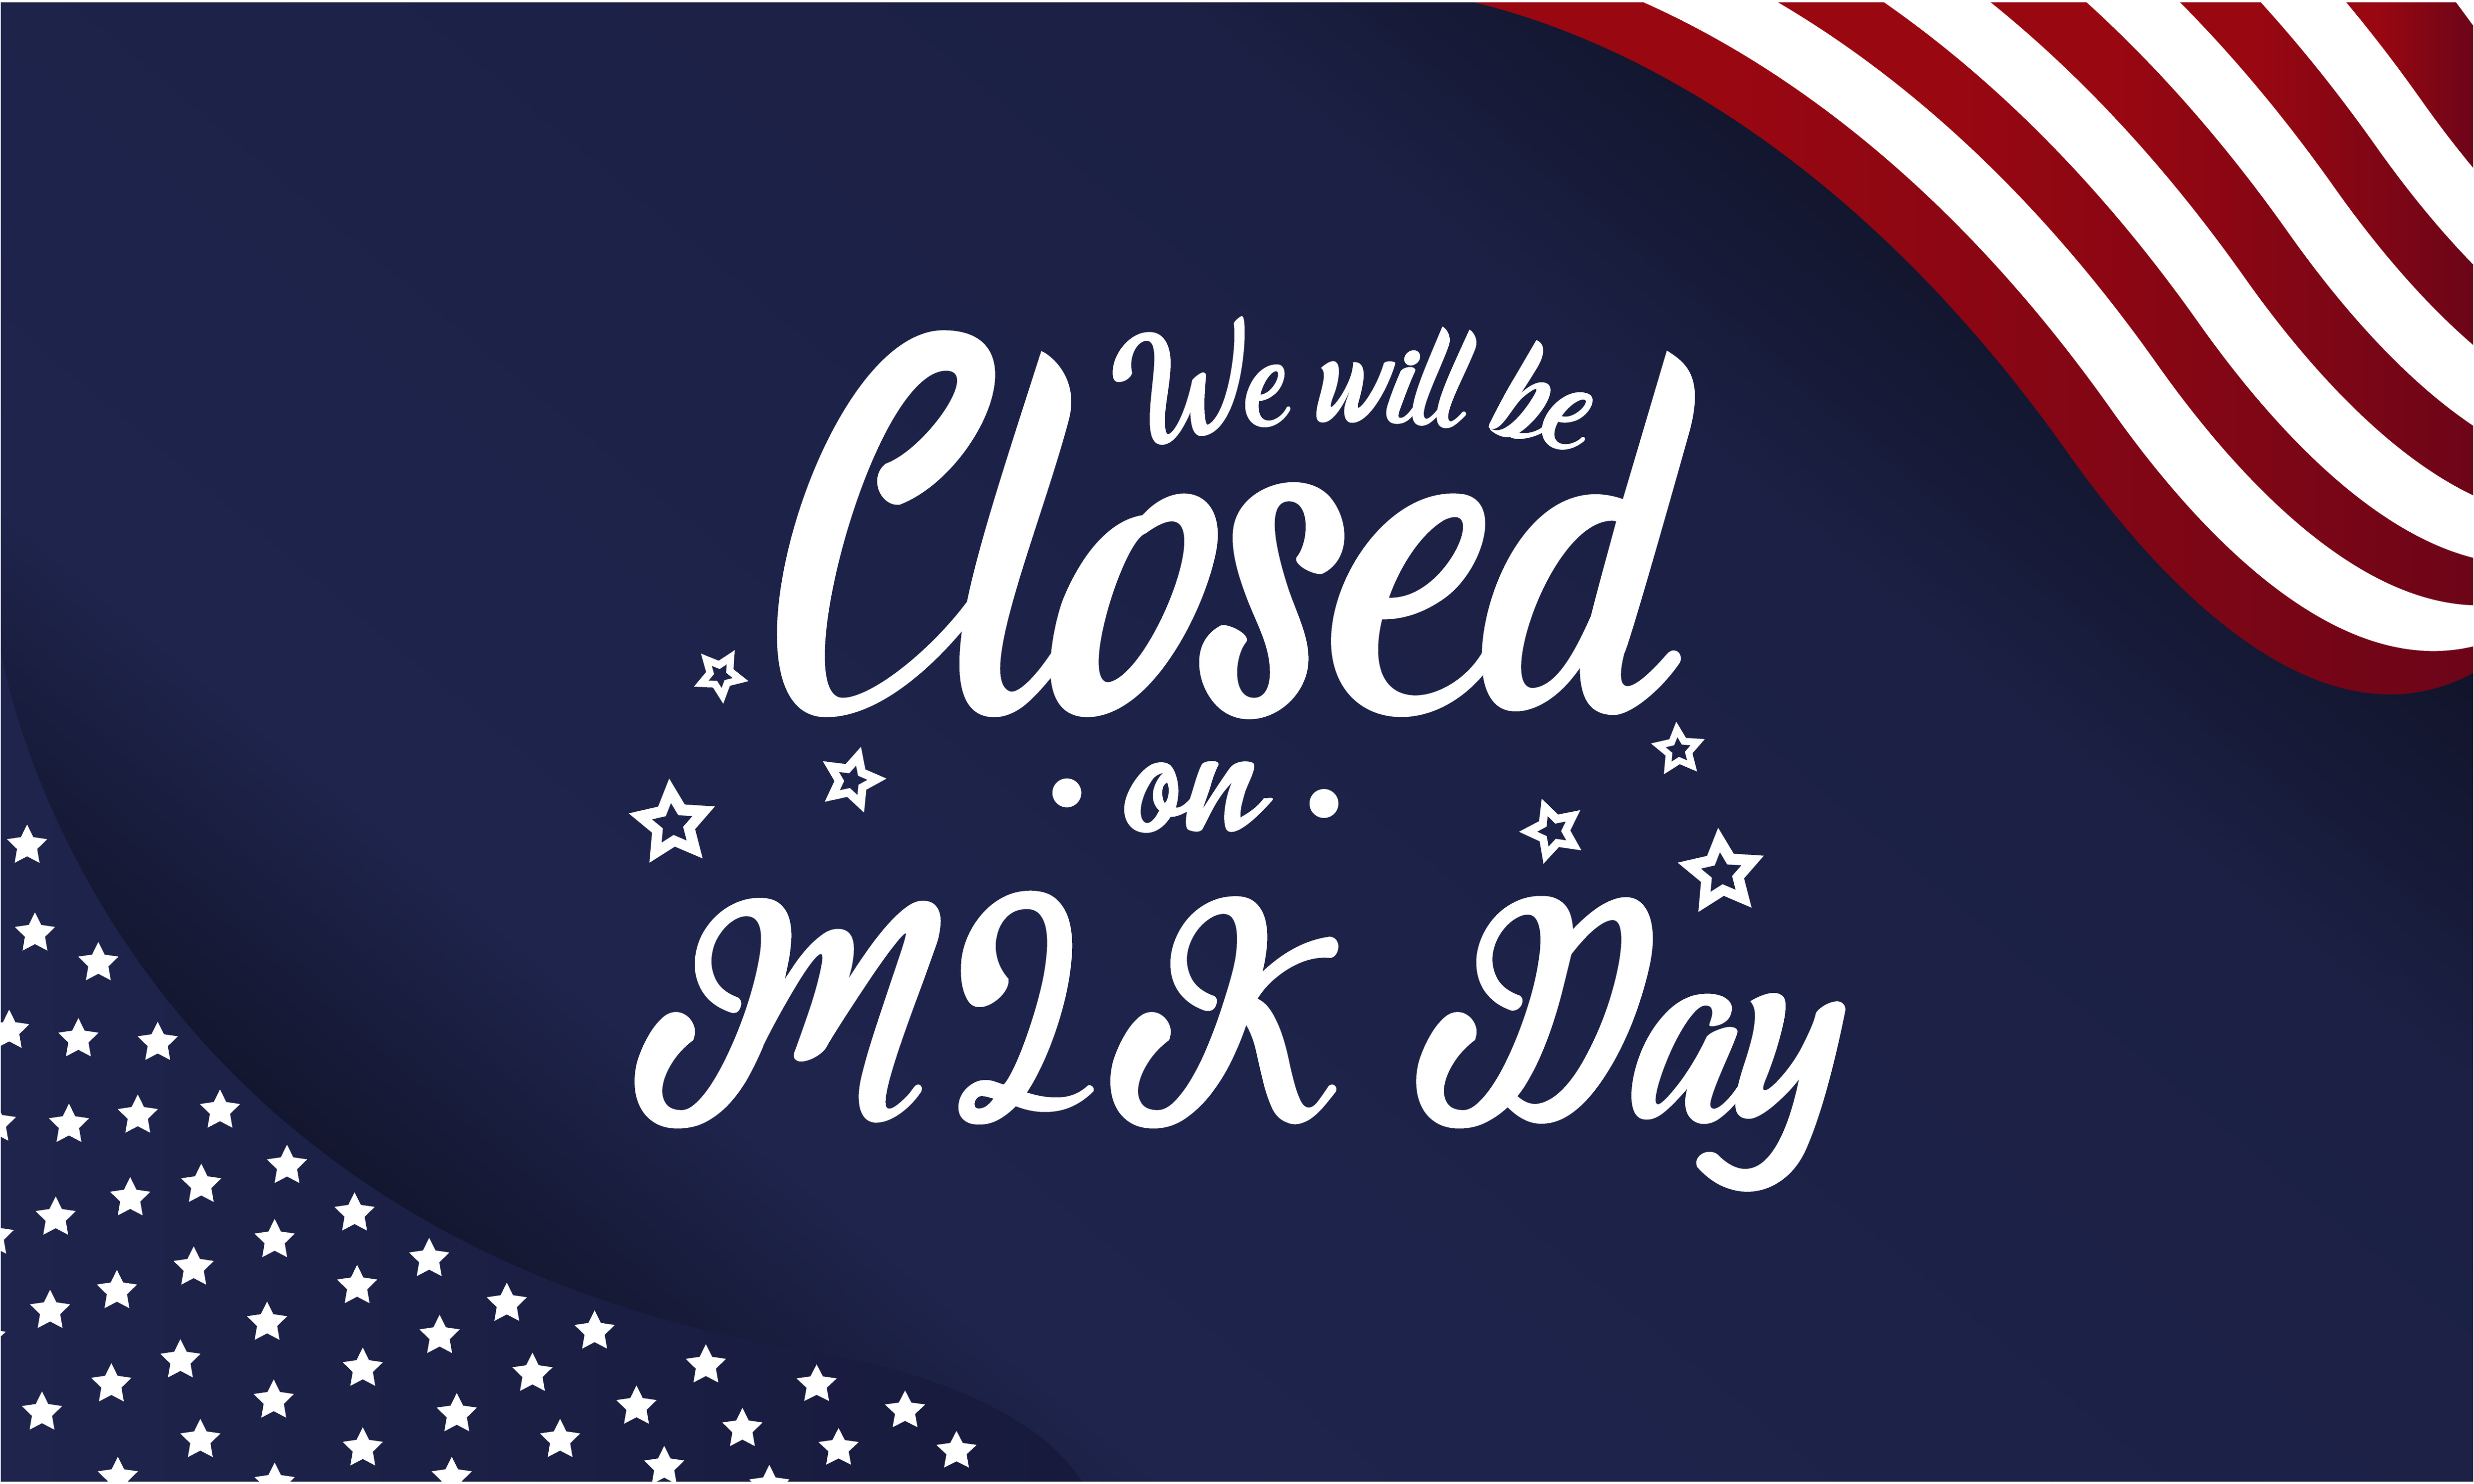 Closed on Monday, January 16 in honor of Martin Luther King Day